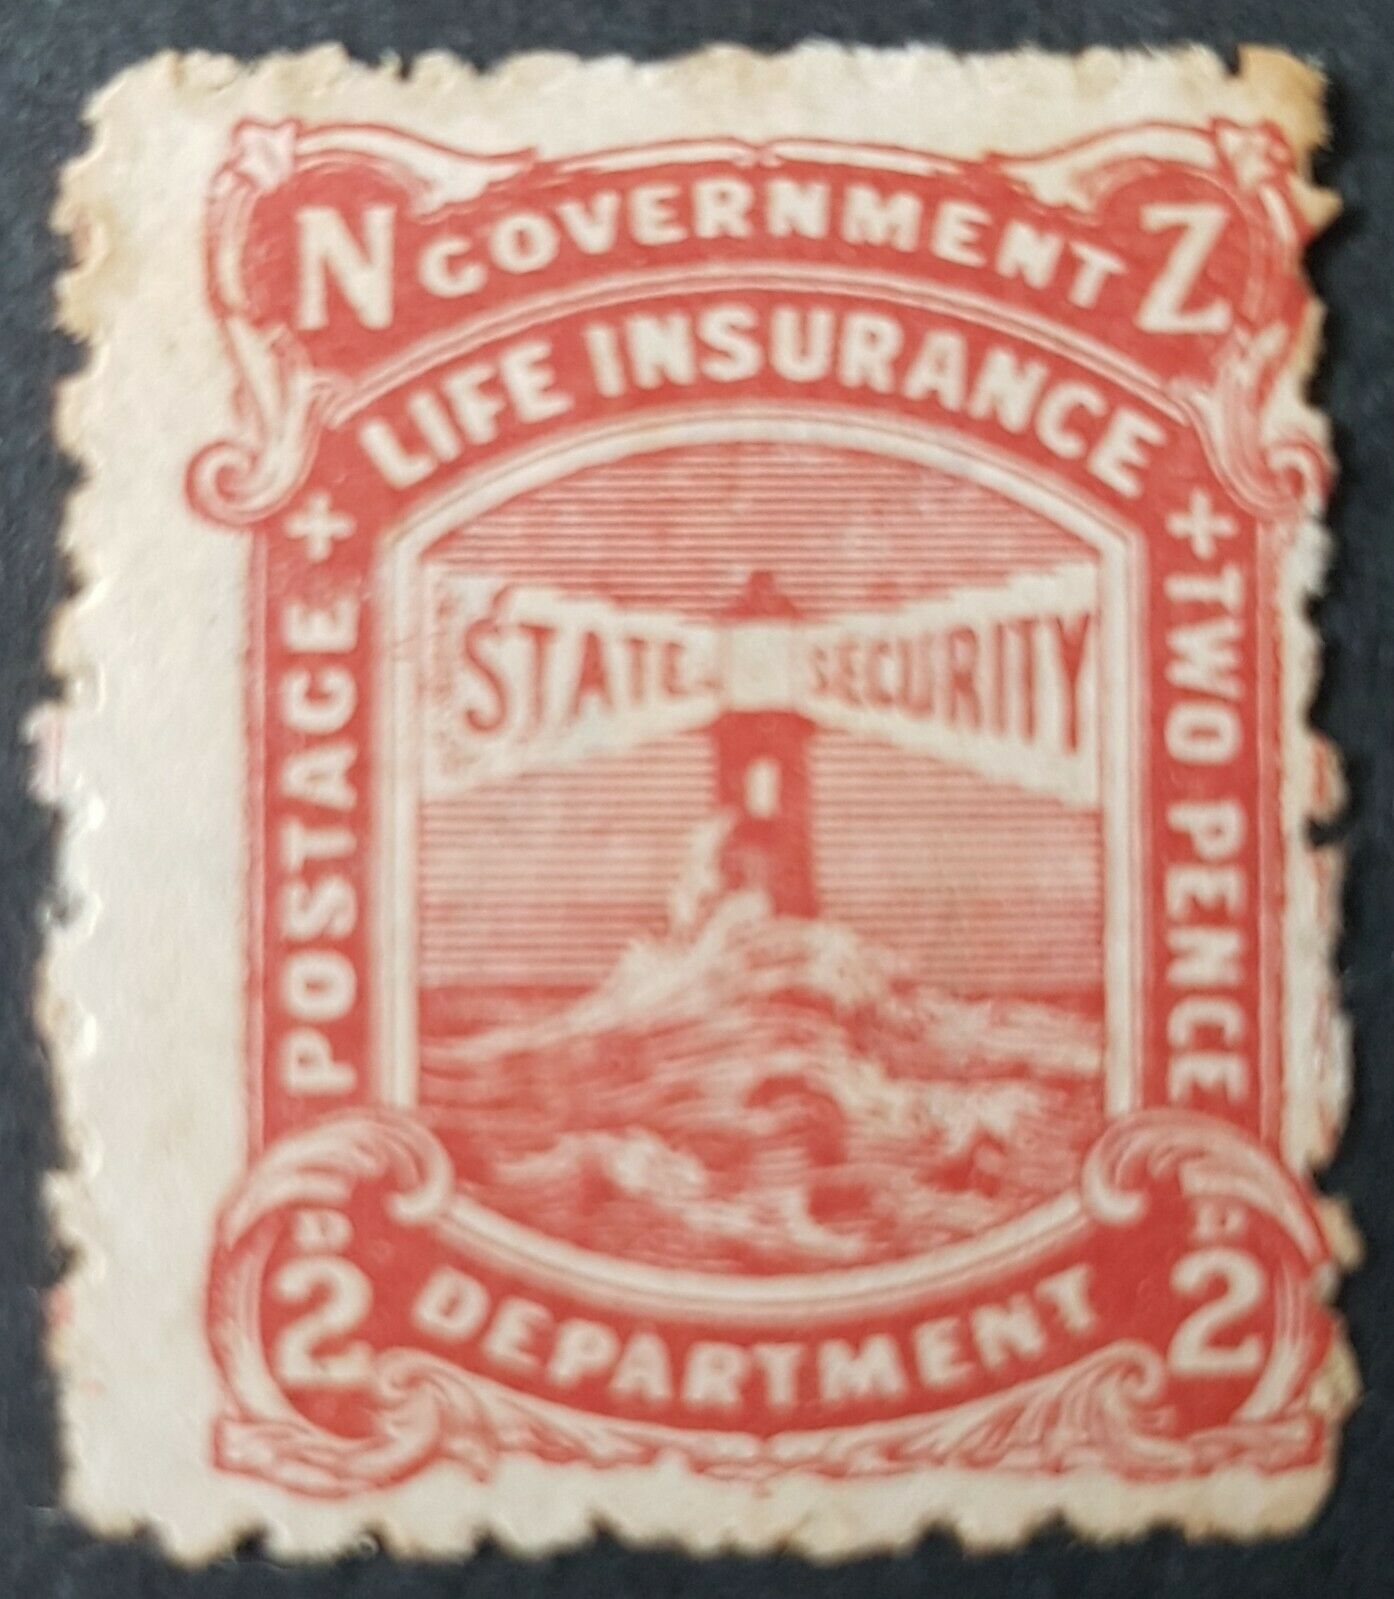 NZ New Zealand 2d Government Insurance Lighthouse SG L21 MUH Stained